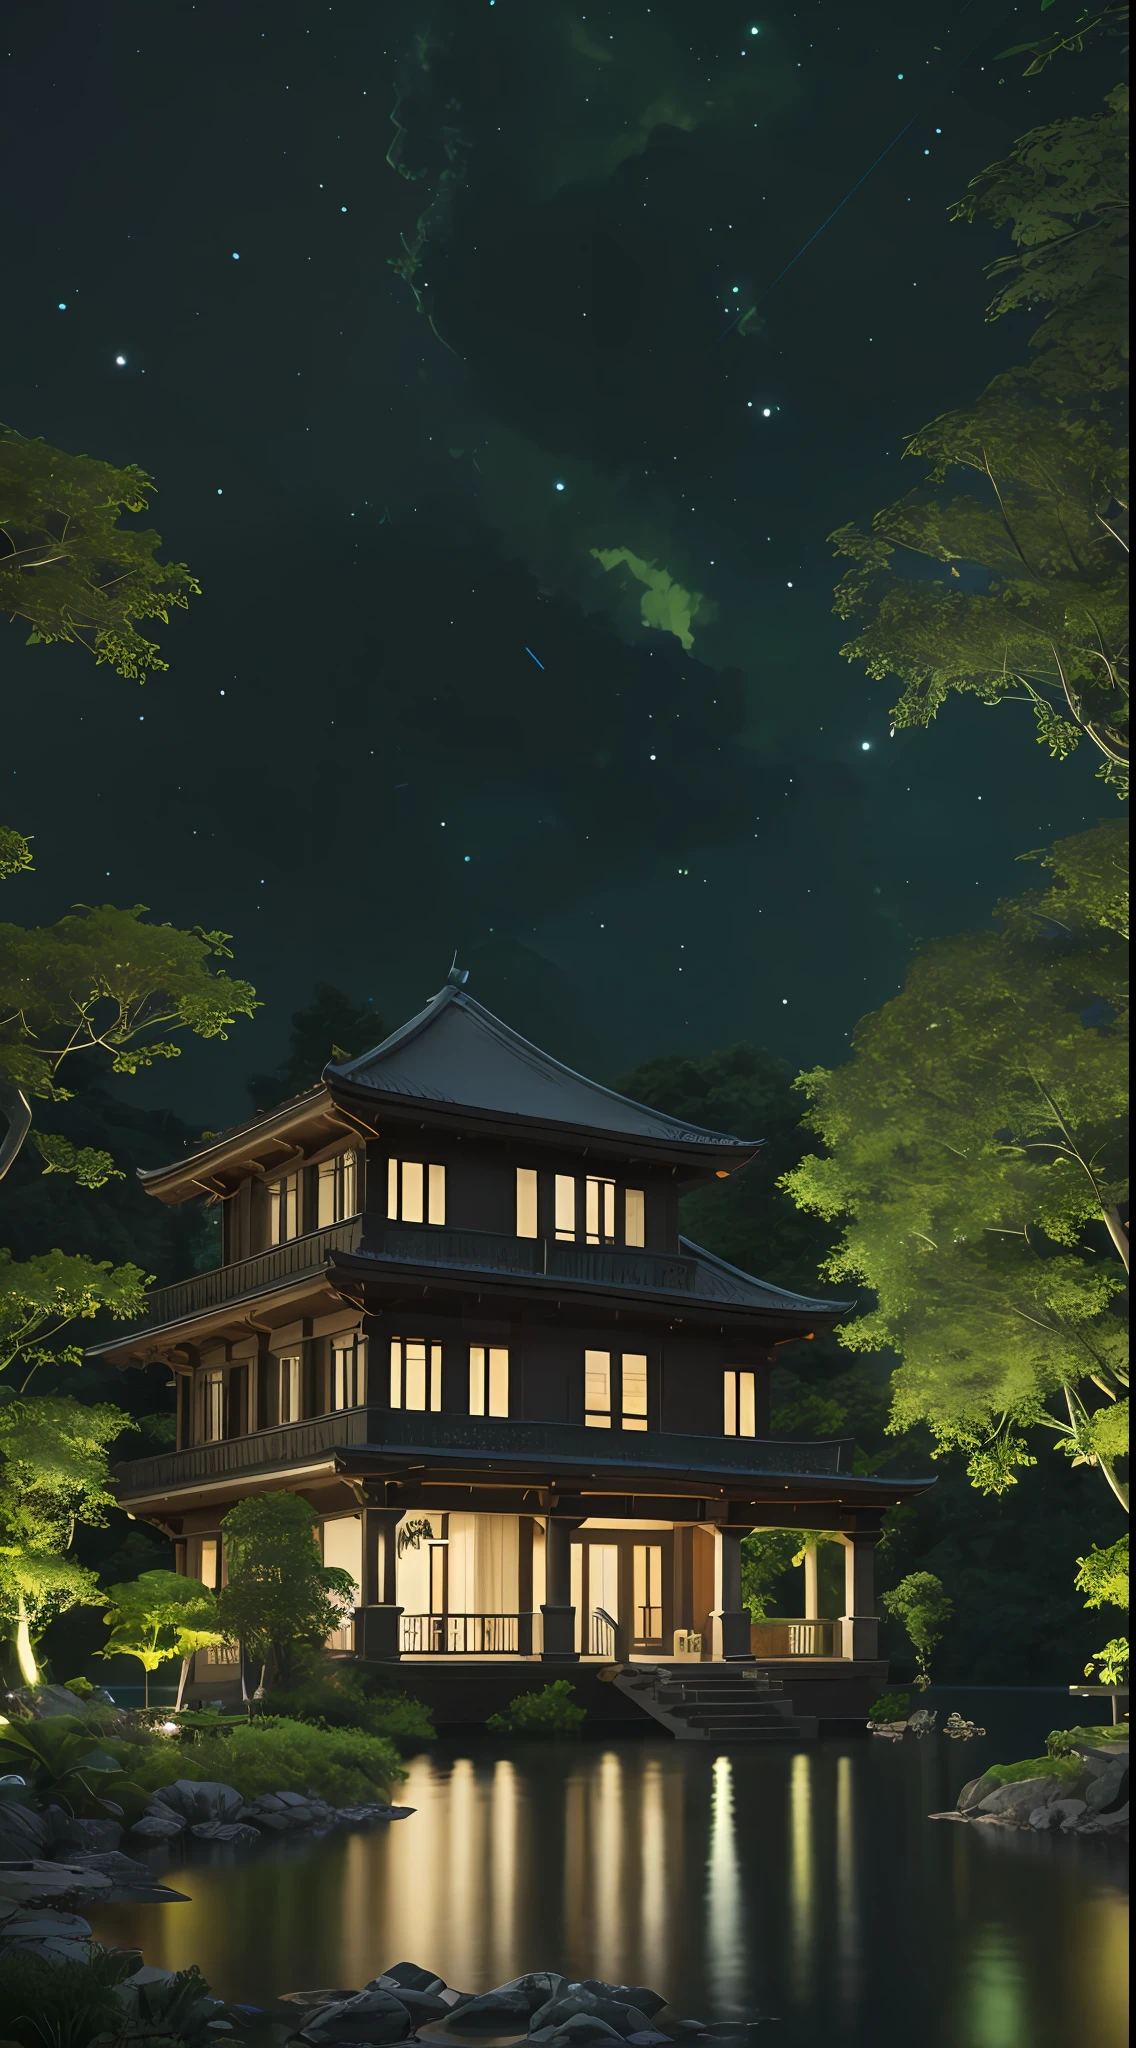 A nice little villa by the calm lake，the night，Green fluorescence，tropical style，Masterpiece, Proportional, Detailed, trending on artstationh, Beautiful lighting, Realistic, Intricate, Award-Awarded, 8K, highest quality
Award-winning, Yoshitaka Amano's 8K digital painting. Beautiful lighting and cinematic composition make this piece a true masterpiece, trending on artstationh